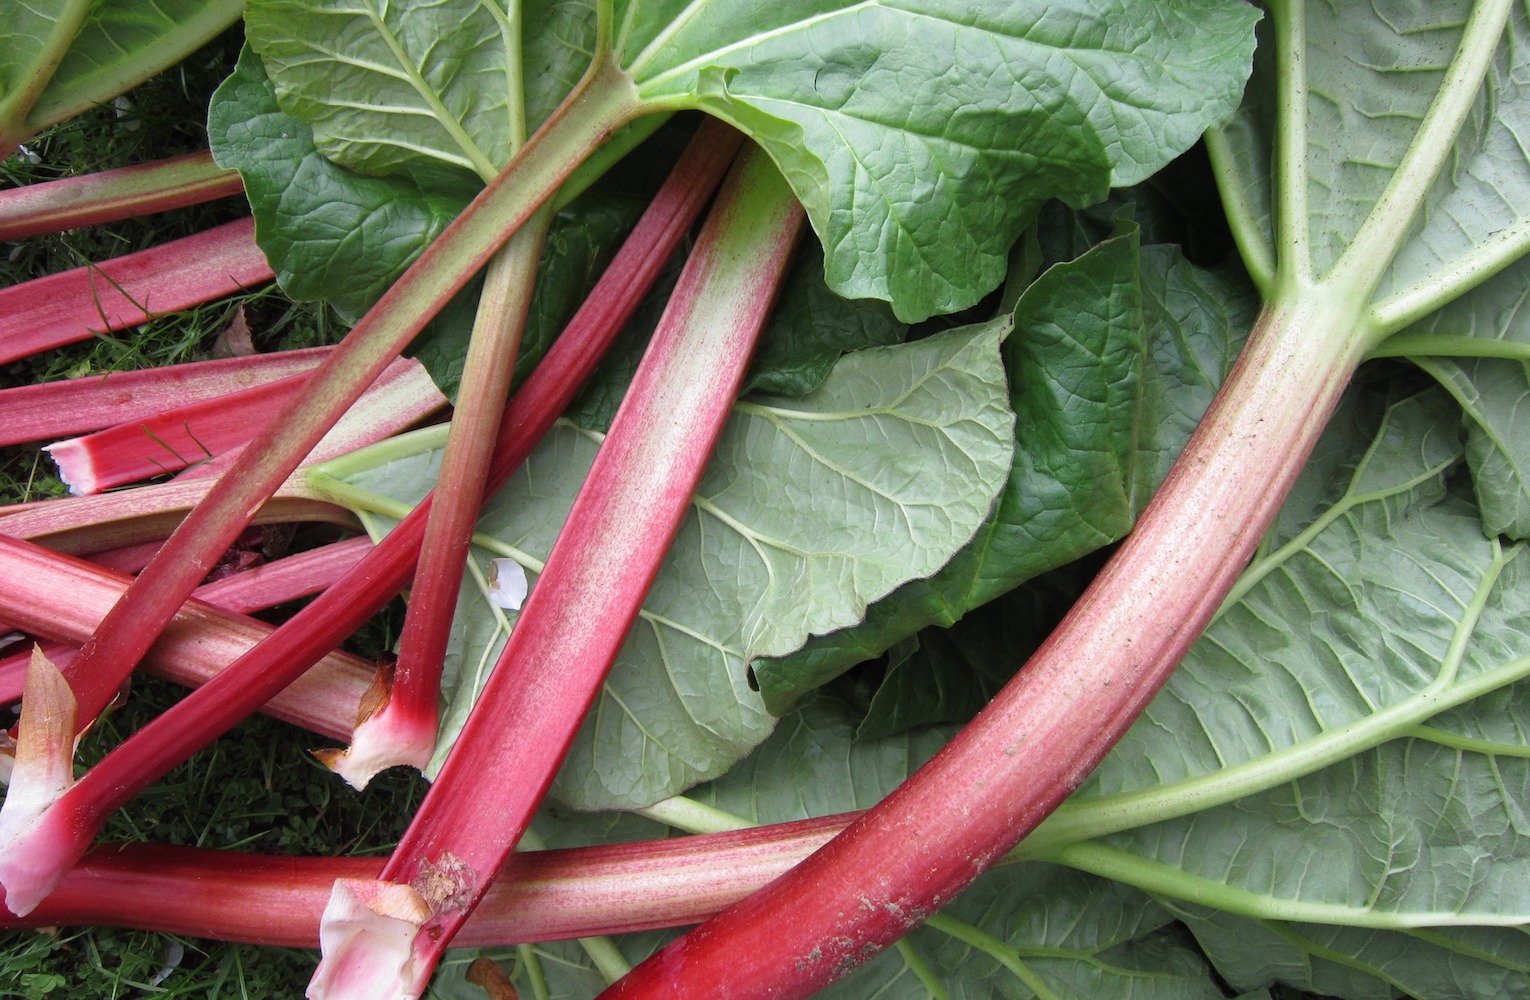 Rhubarb is an early spring fruit.